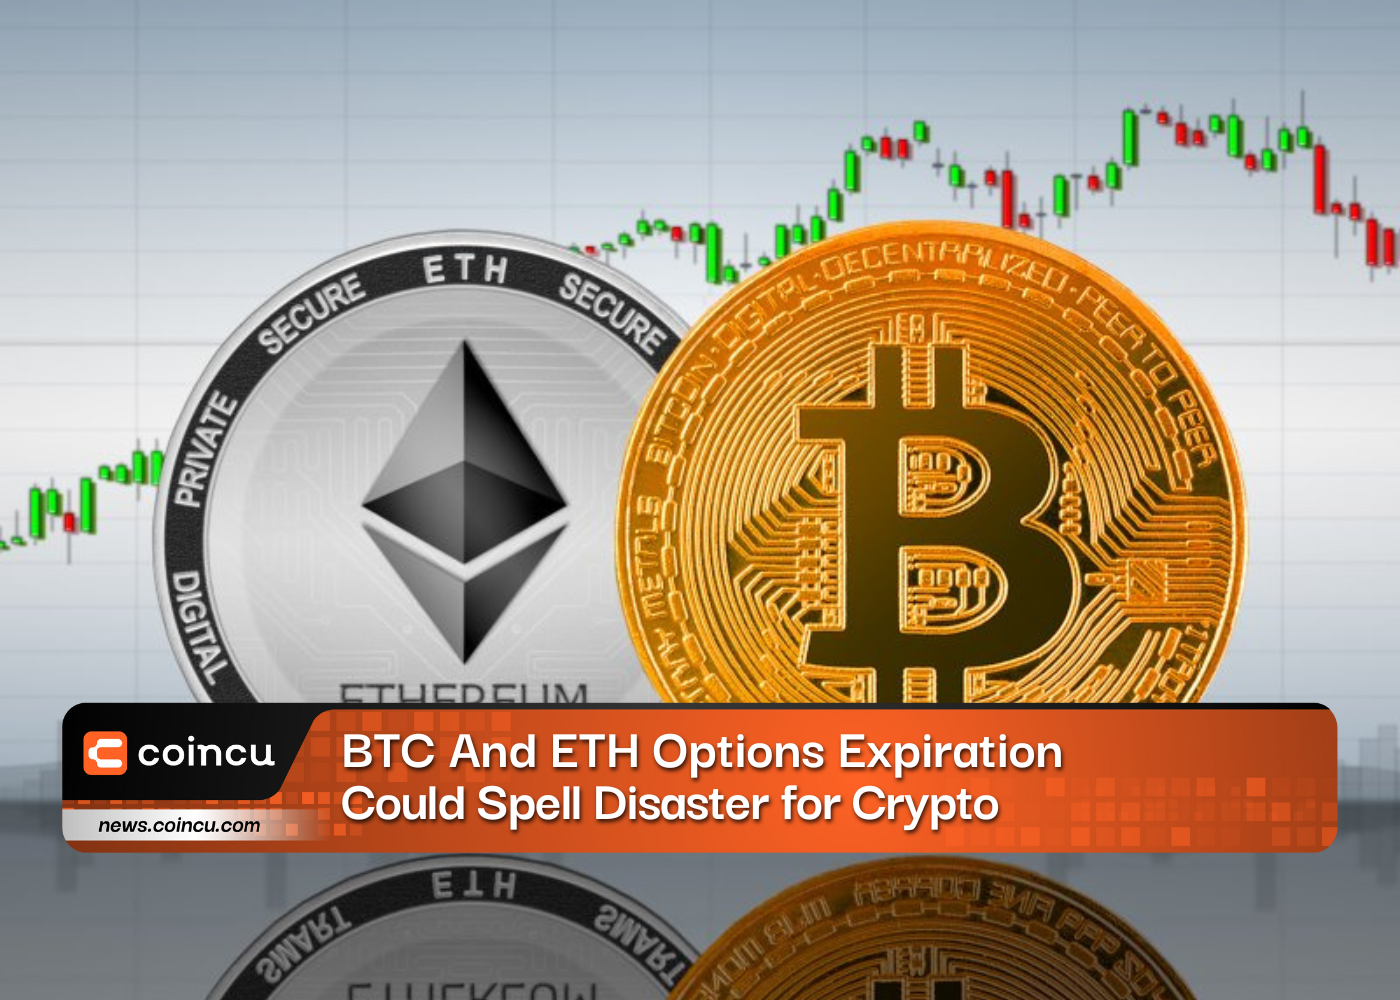 BTC And ETH Options Expiration Could Spell Disaster for Crypto